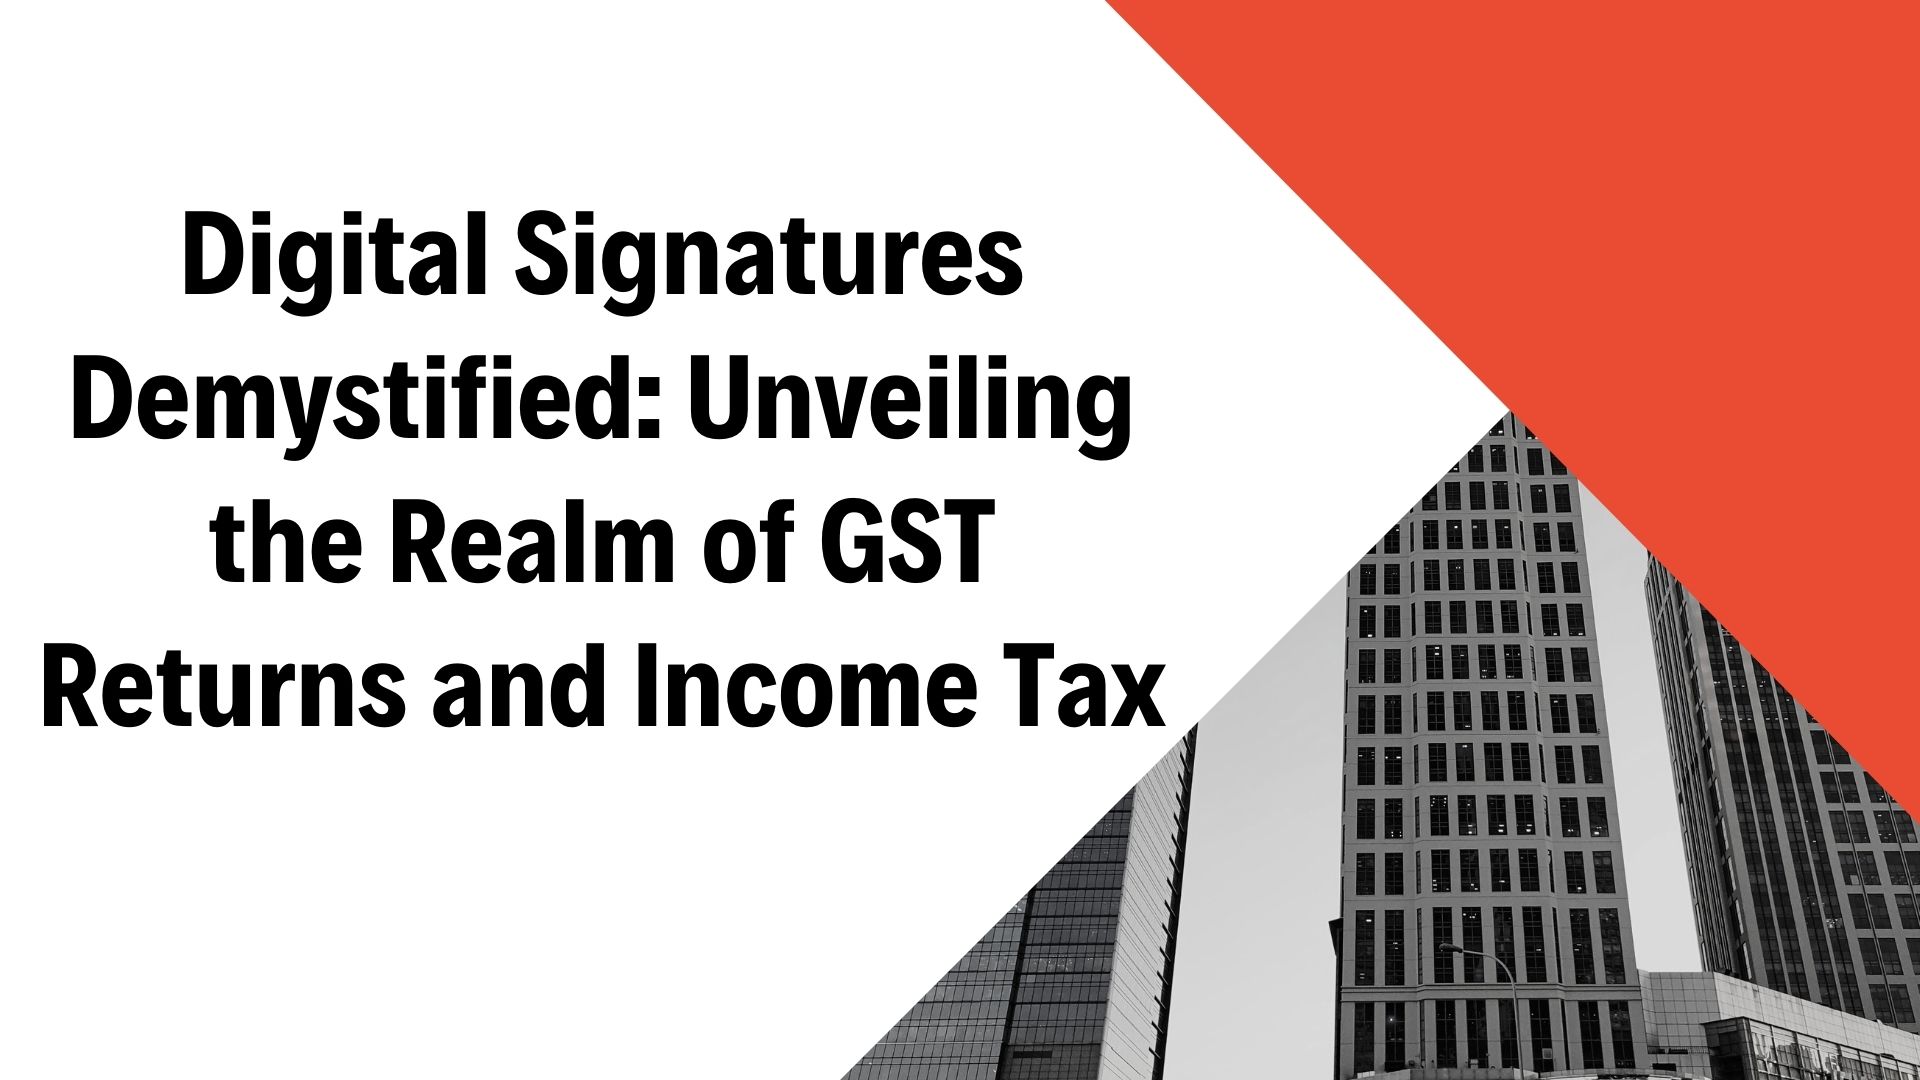 Digital Signatures Demystified: Unveiling the Realm of GST Returns and Income Tax